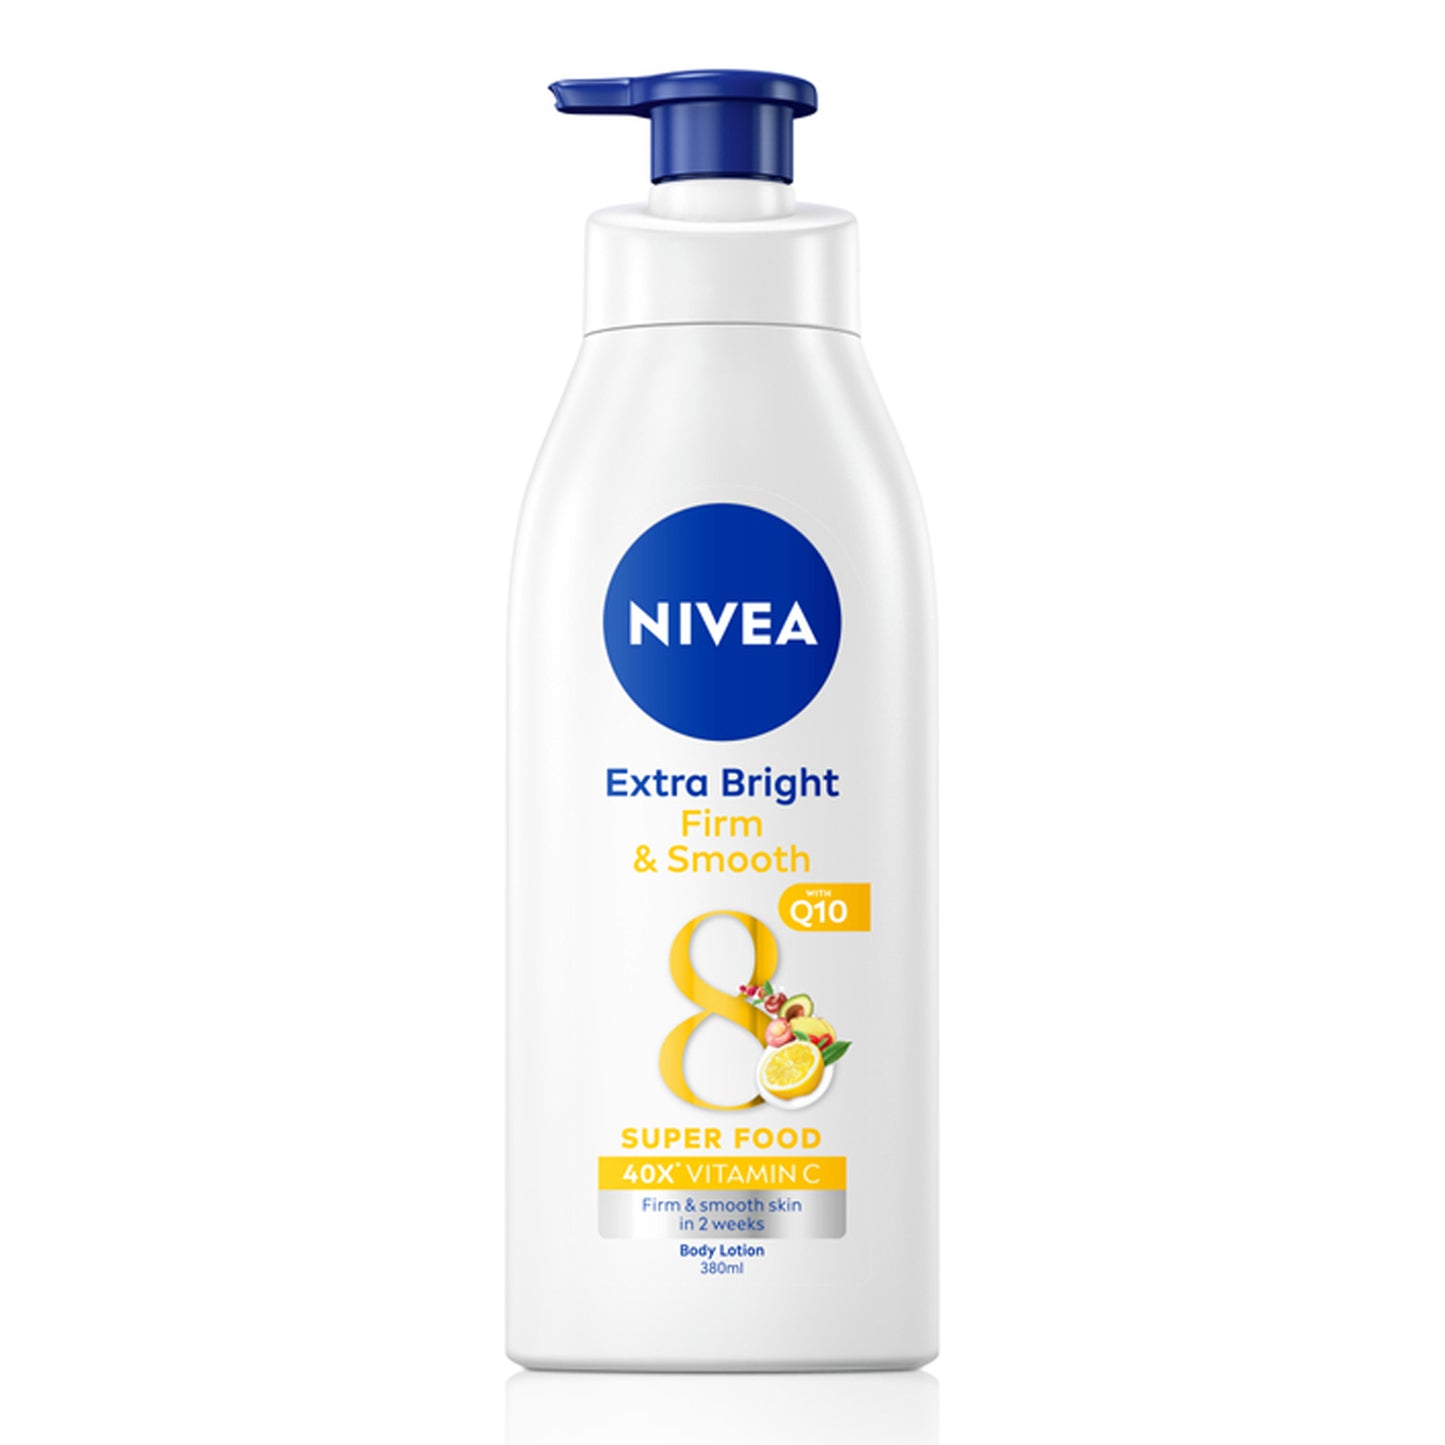 NIVEA - EXTRA BRIGHT FIRM & SMOOTH 8 SUPER FOOD BODY LOTION WITH Q10 - 380ML